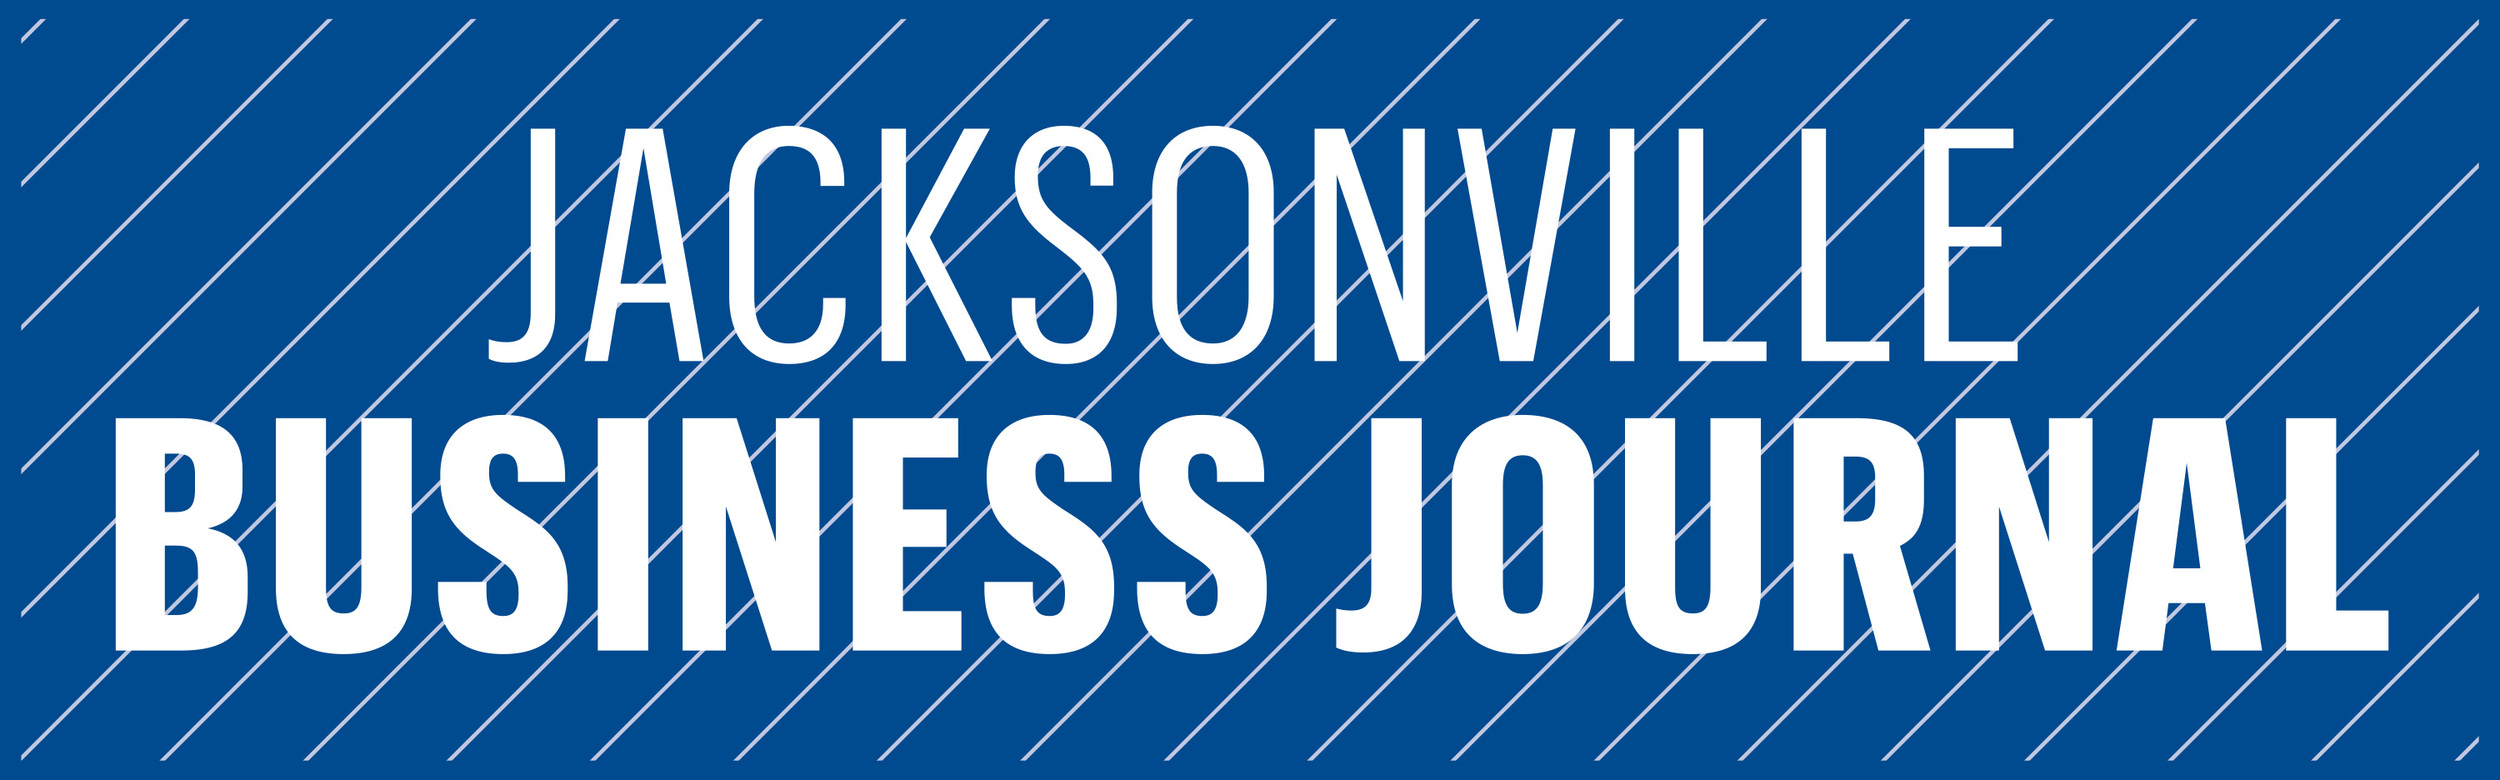 IMCO manufacturing software Jacksonville Business Journal header graphic